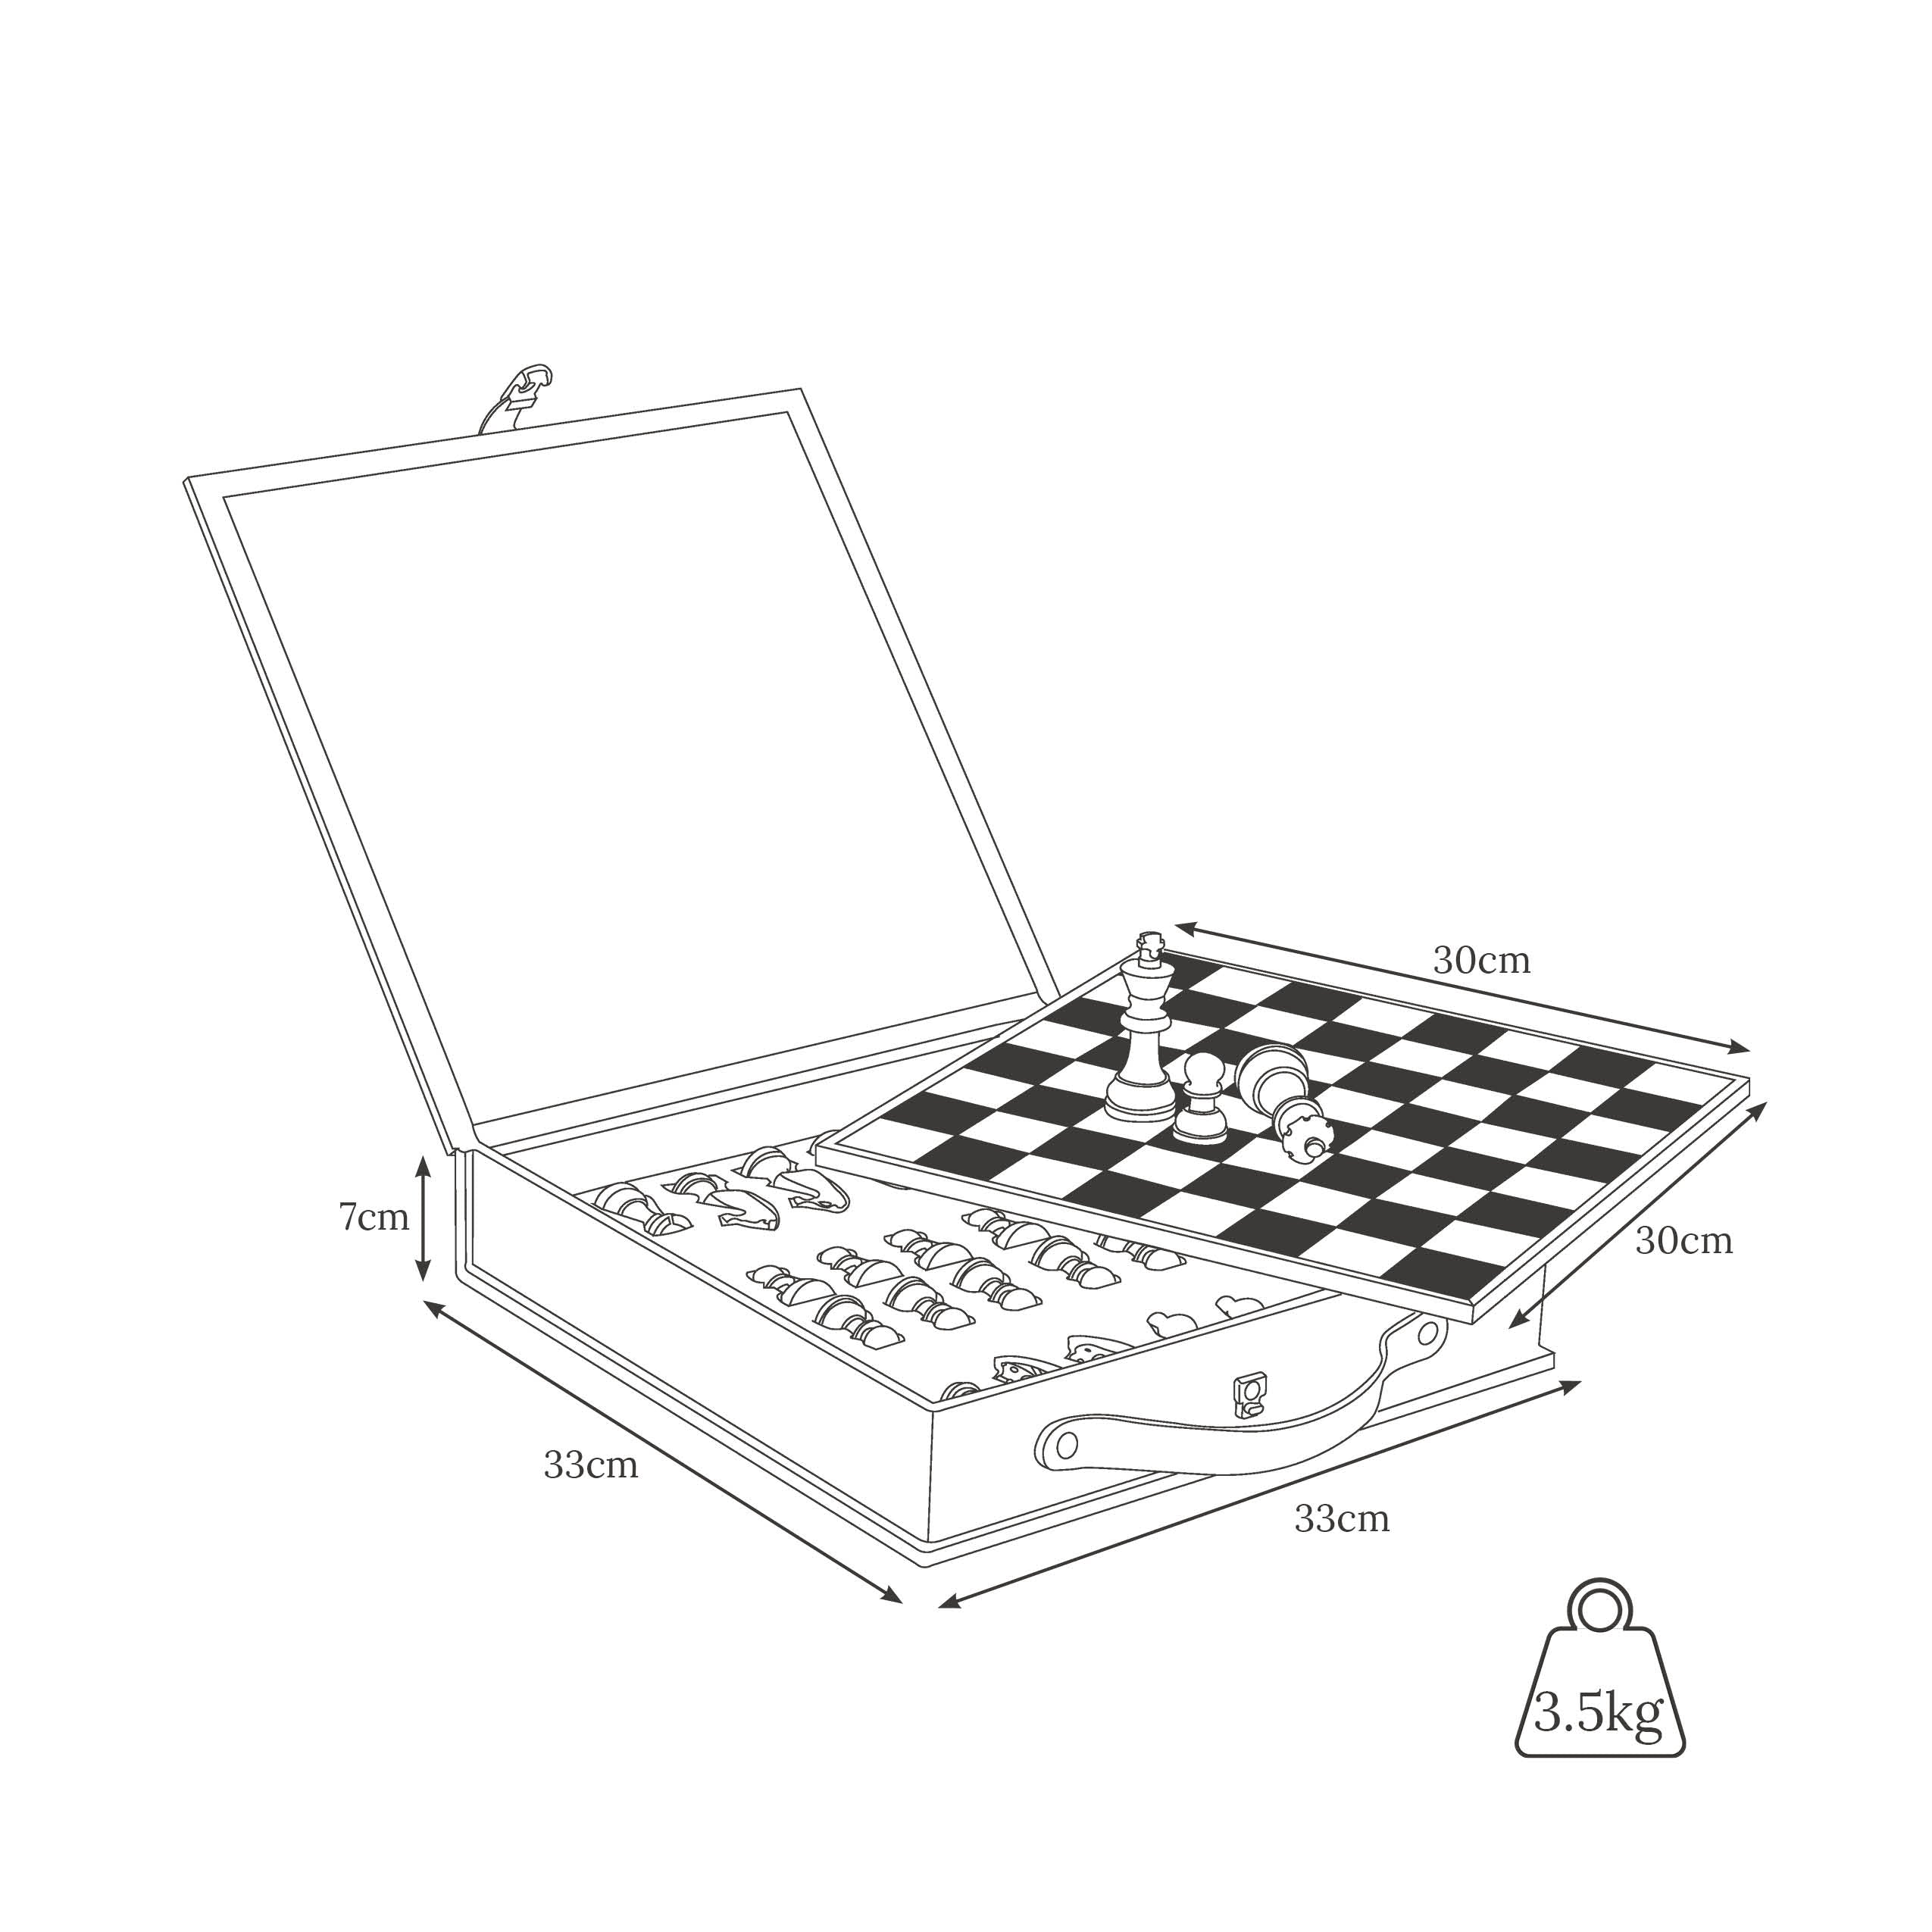 Line drawing of chess set open weight and dimensions